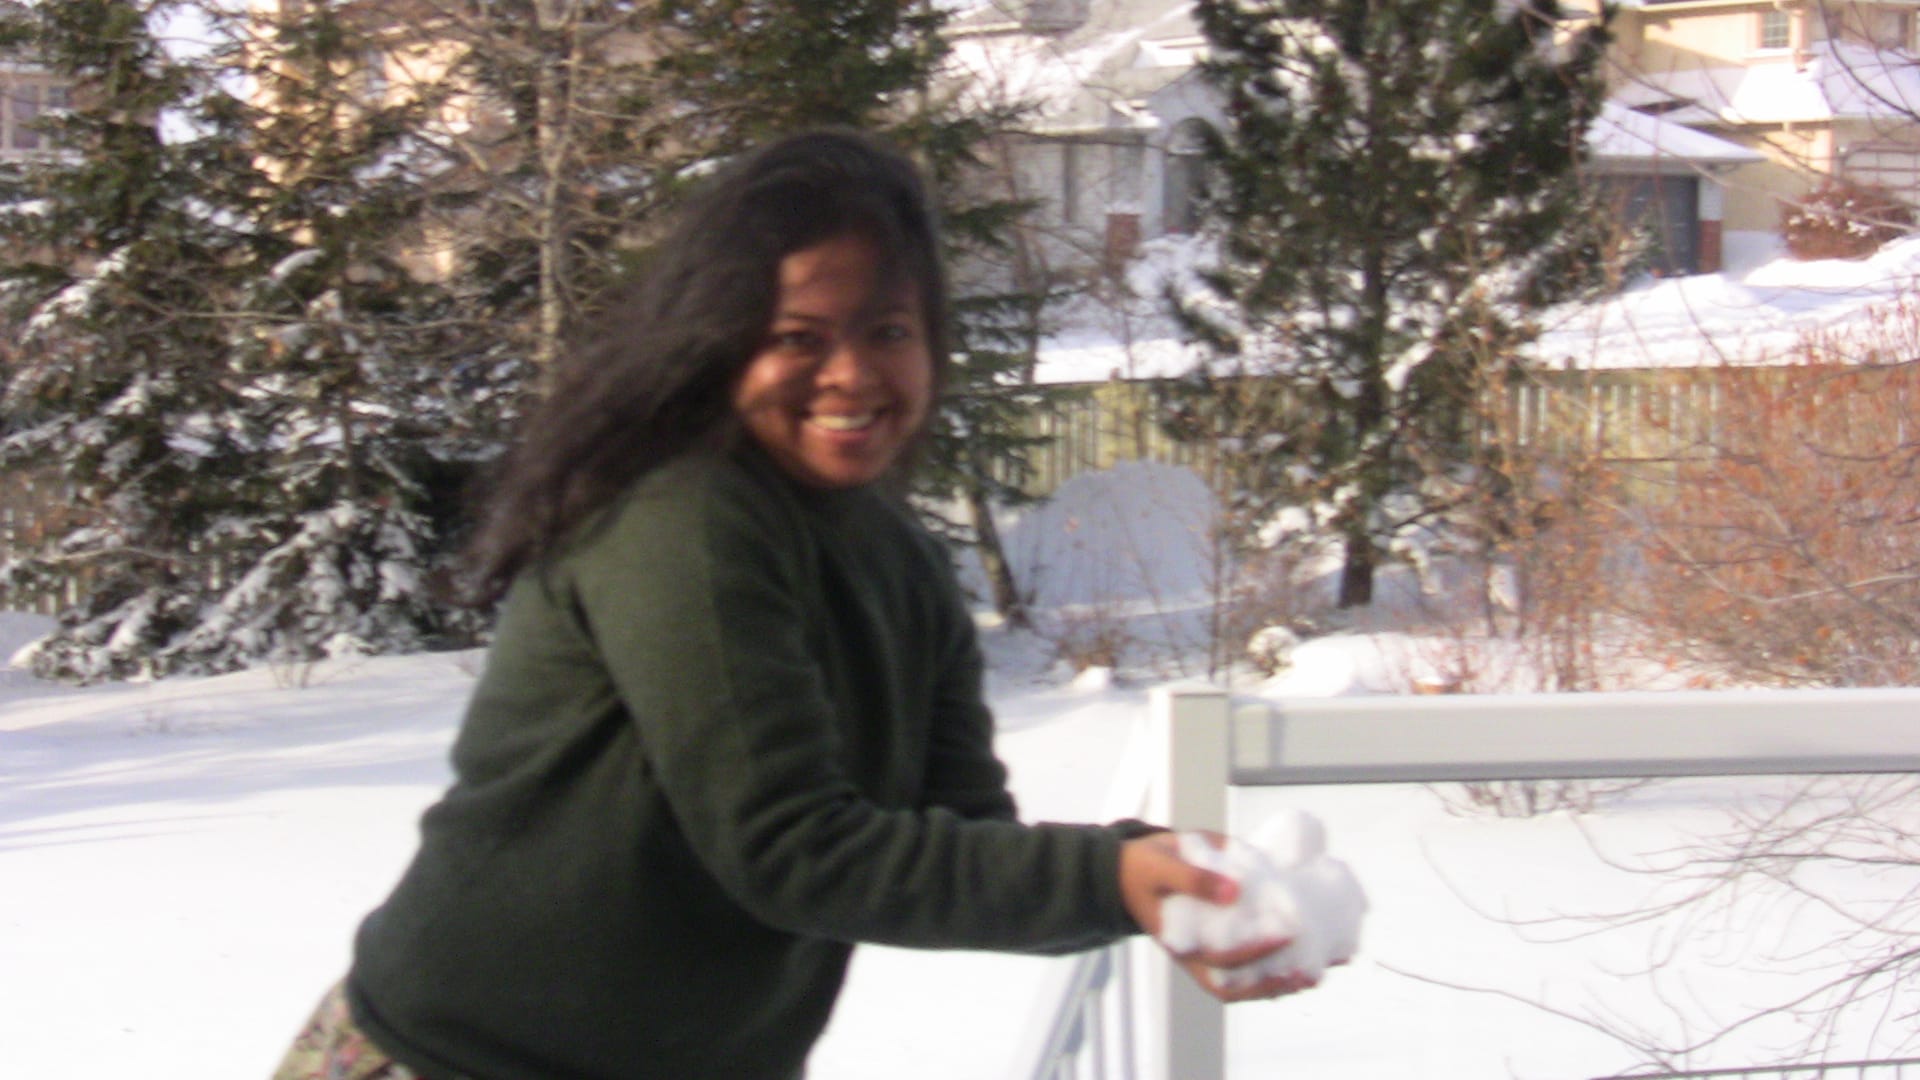 Anandita brought the First Snow to Calgary - and Smiling..